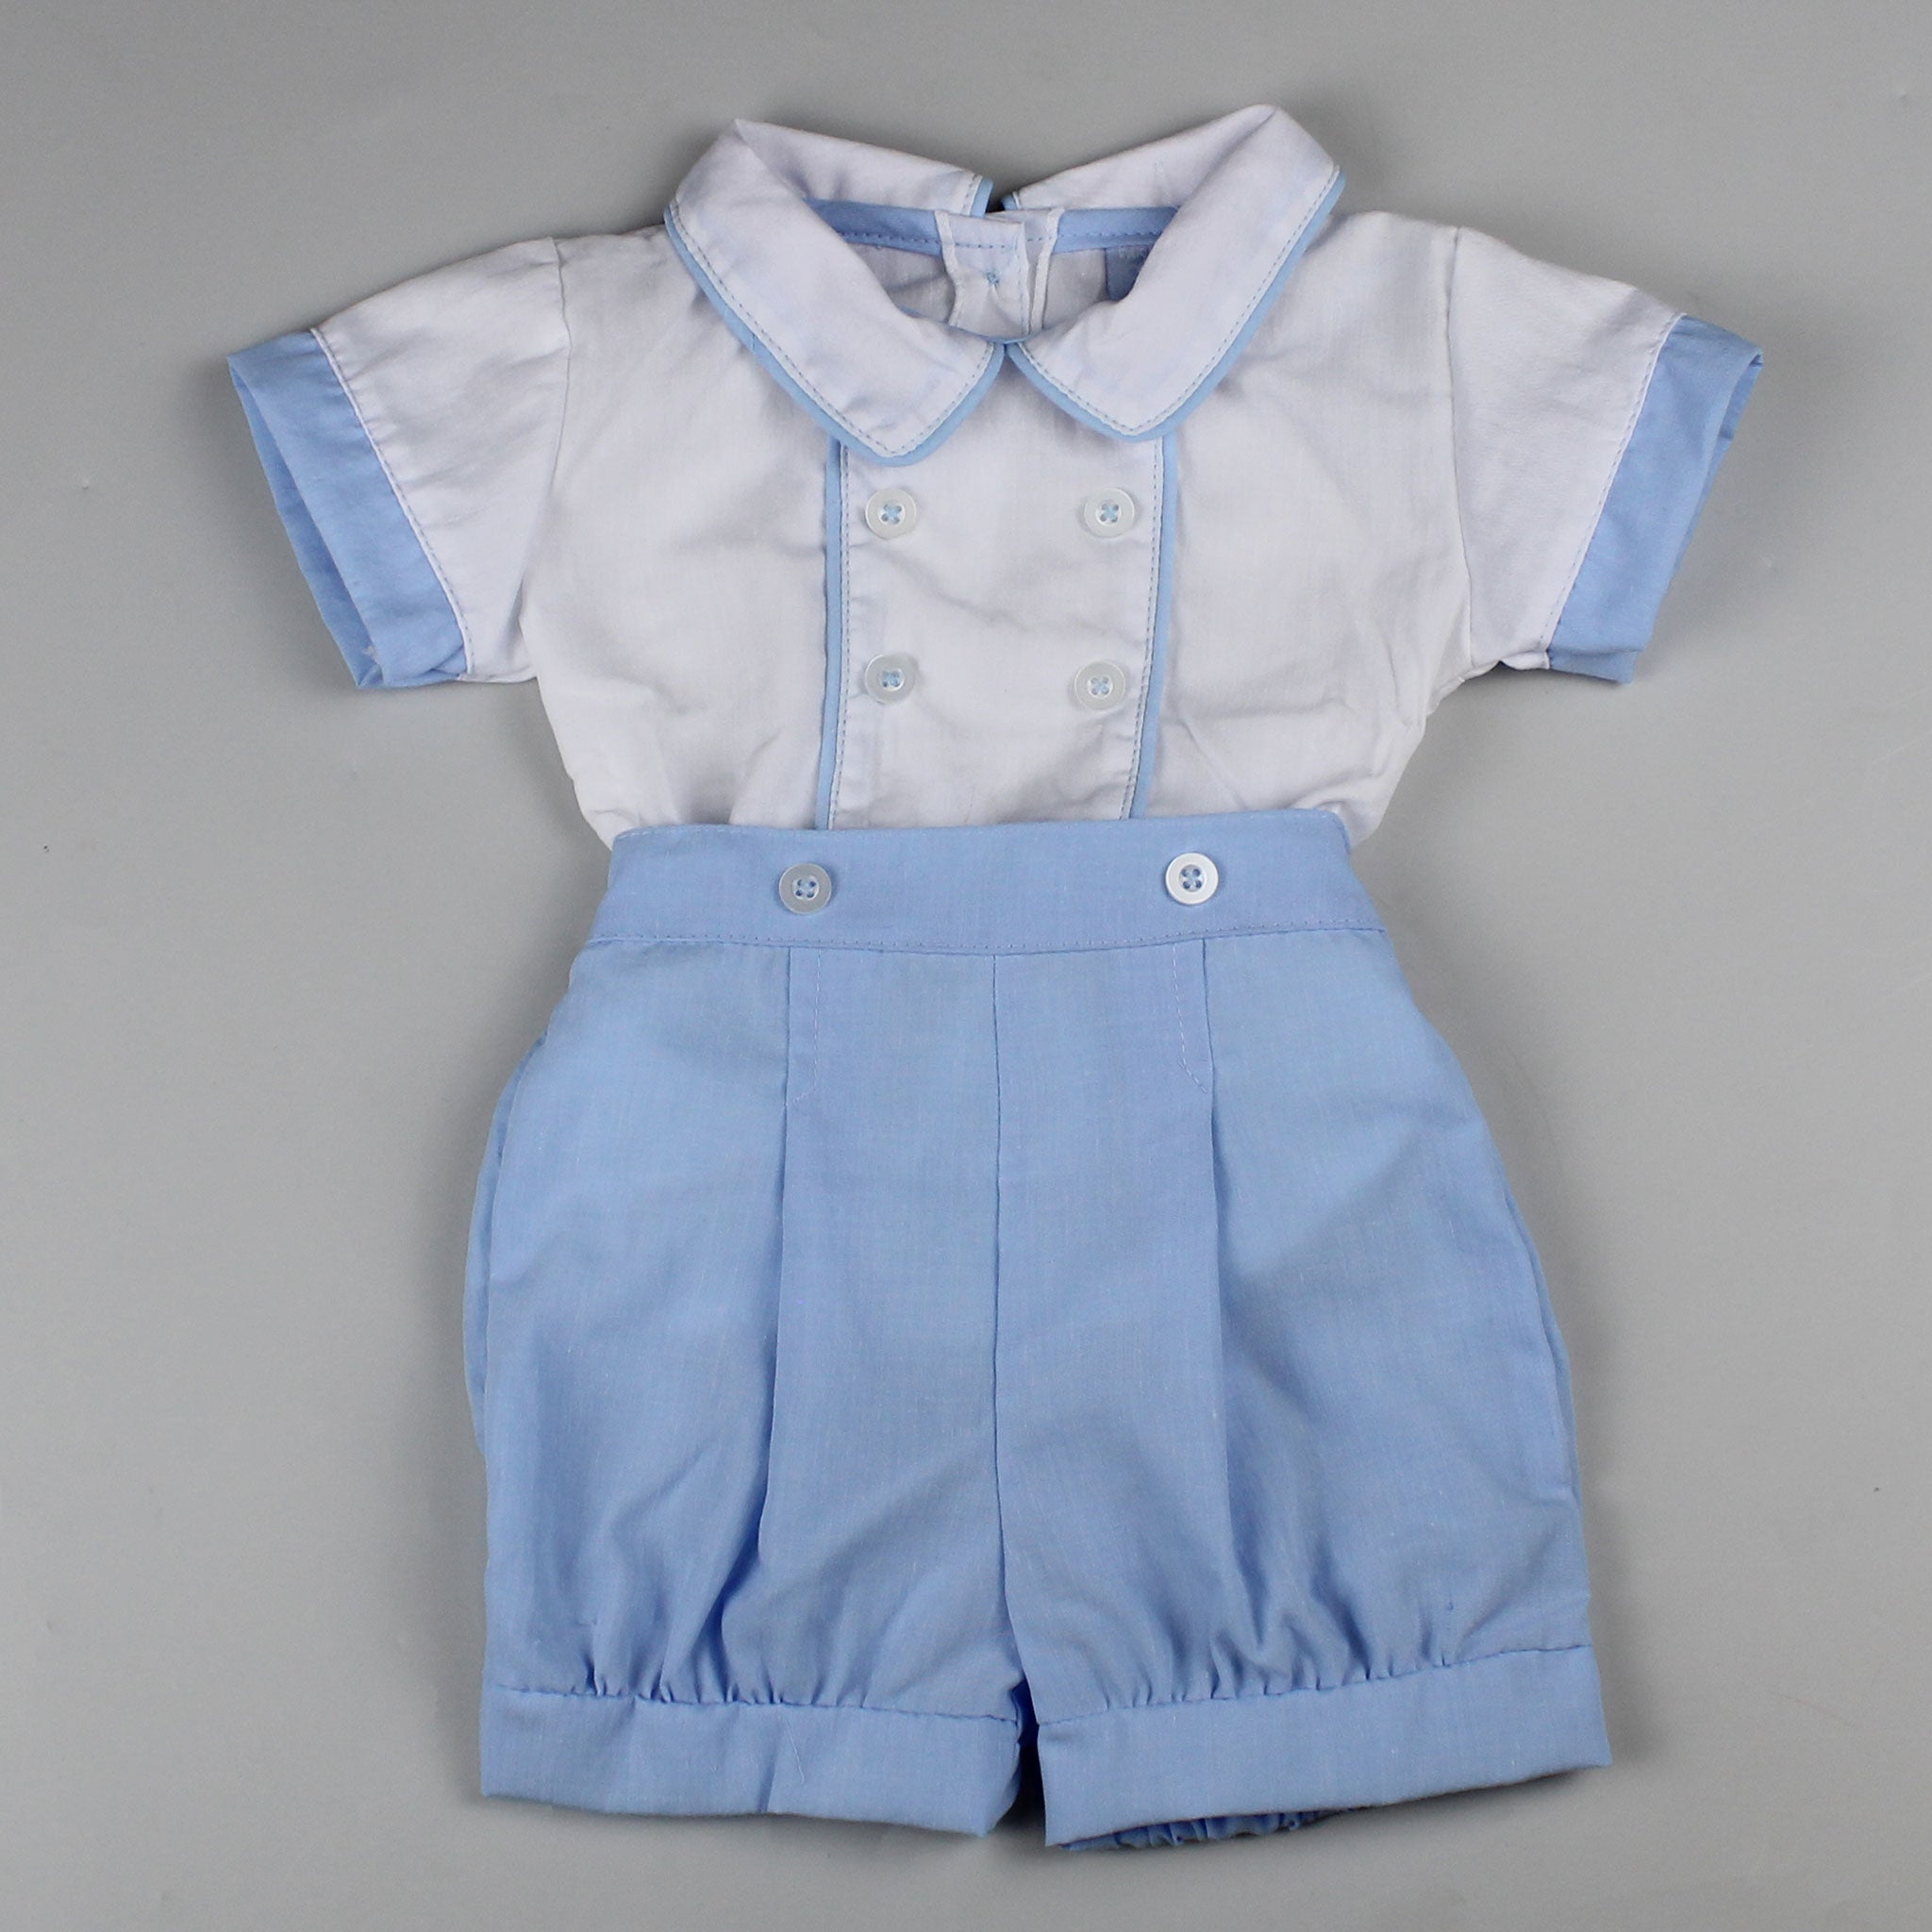 Baby boys two piece traditional outfit